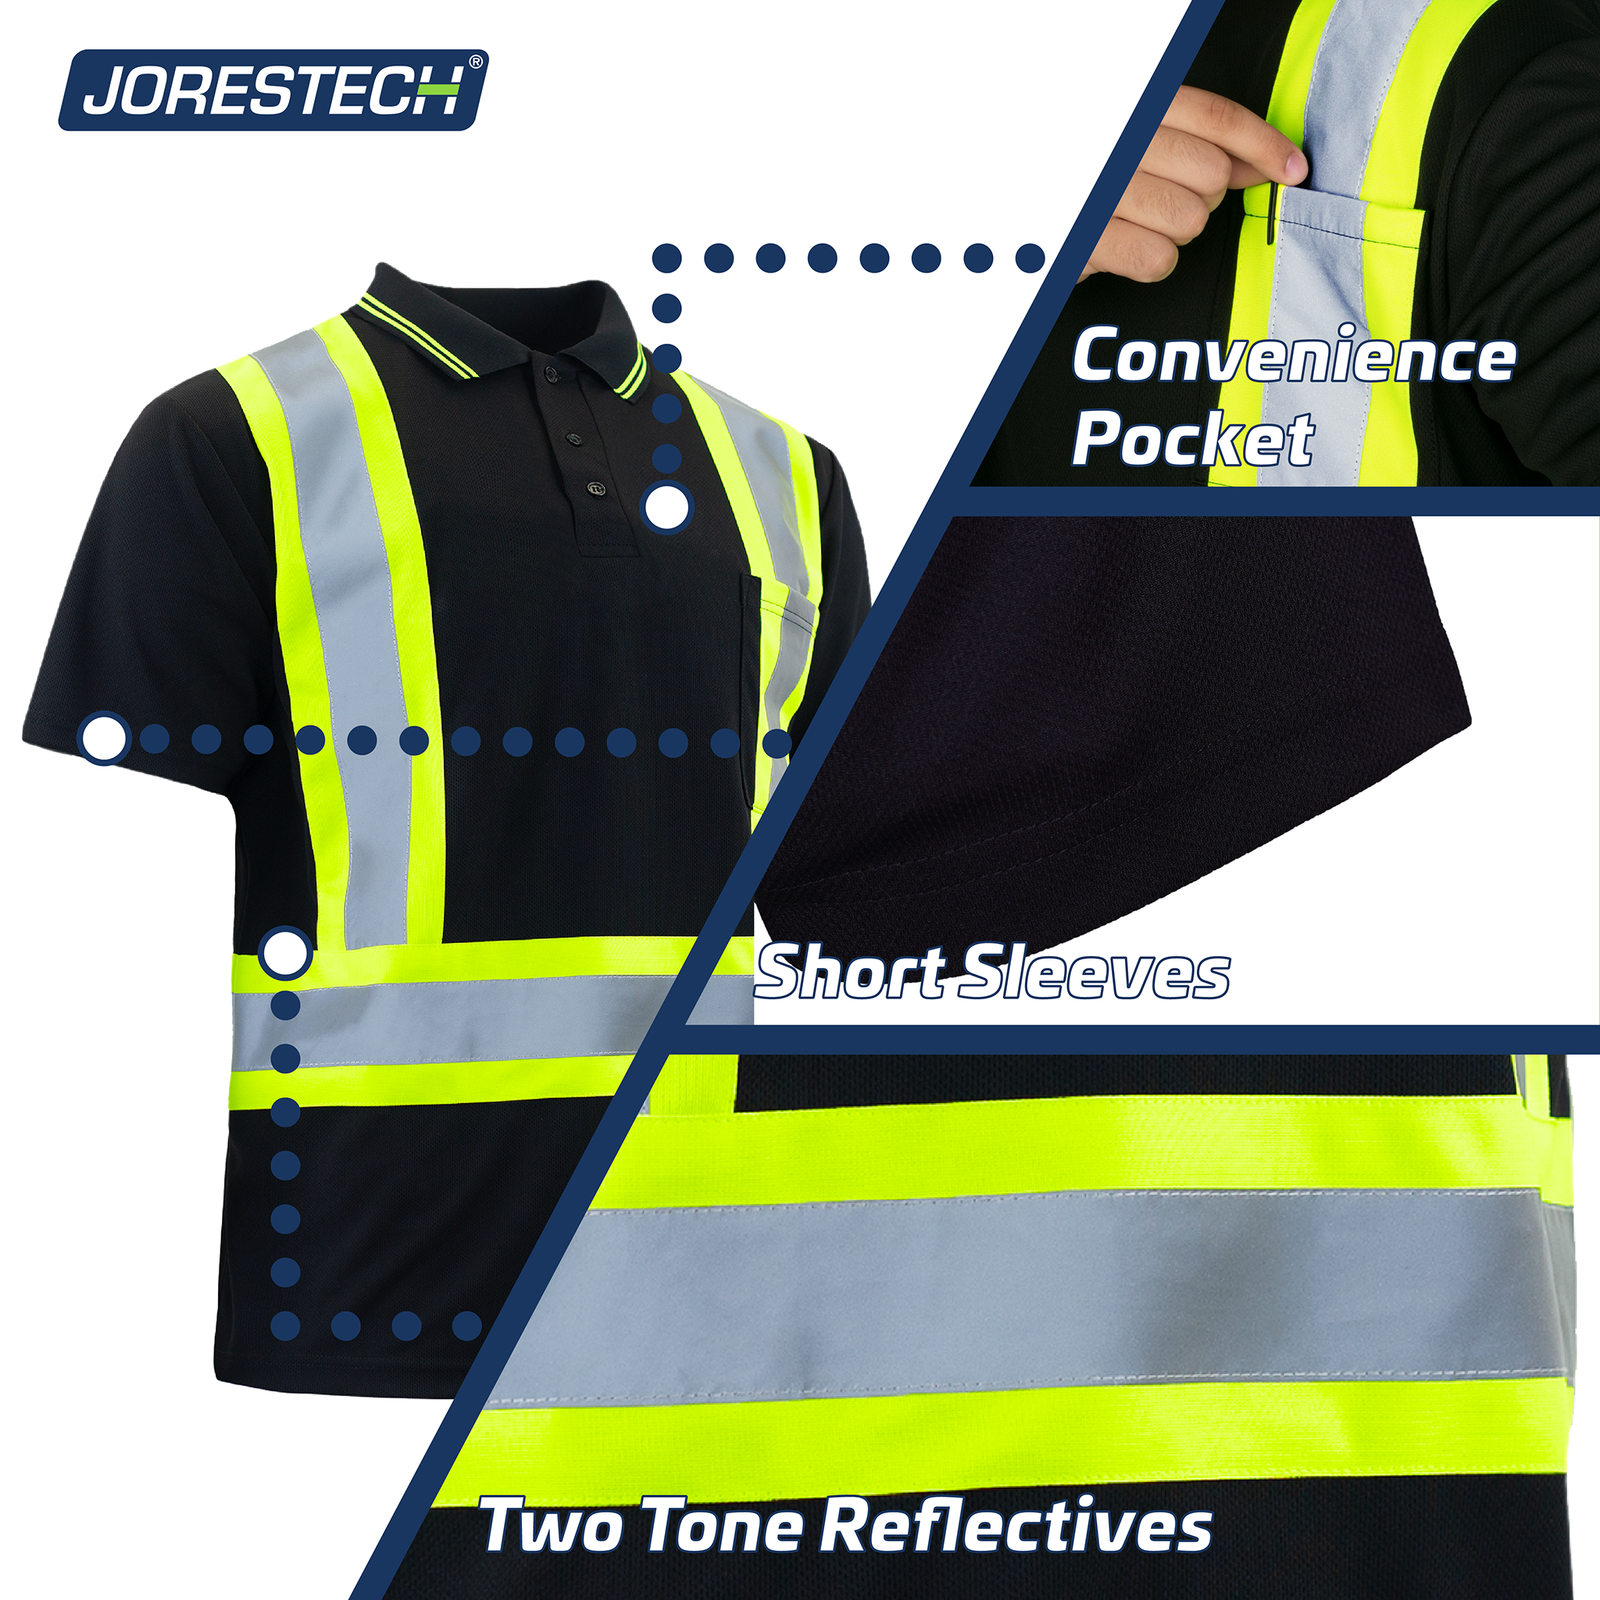 Features of the safety polo shirt. Text reads: Convenience Pocket, Short Sleeves polo shirt and two tone reflective